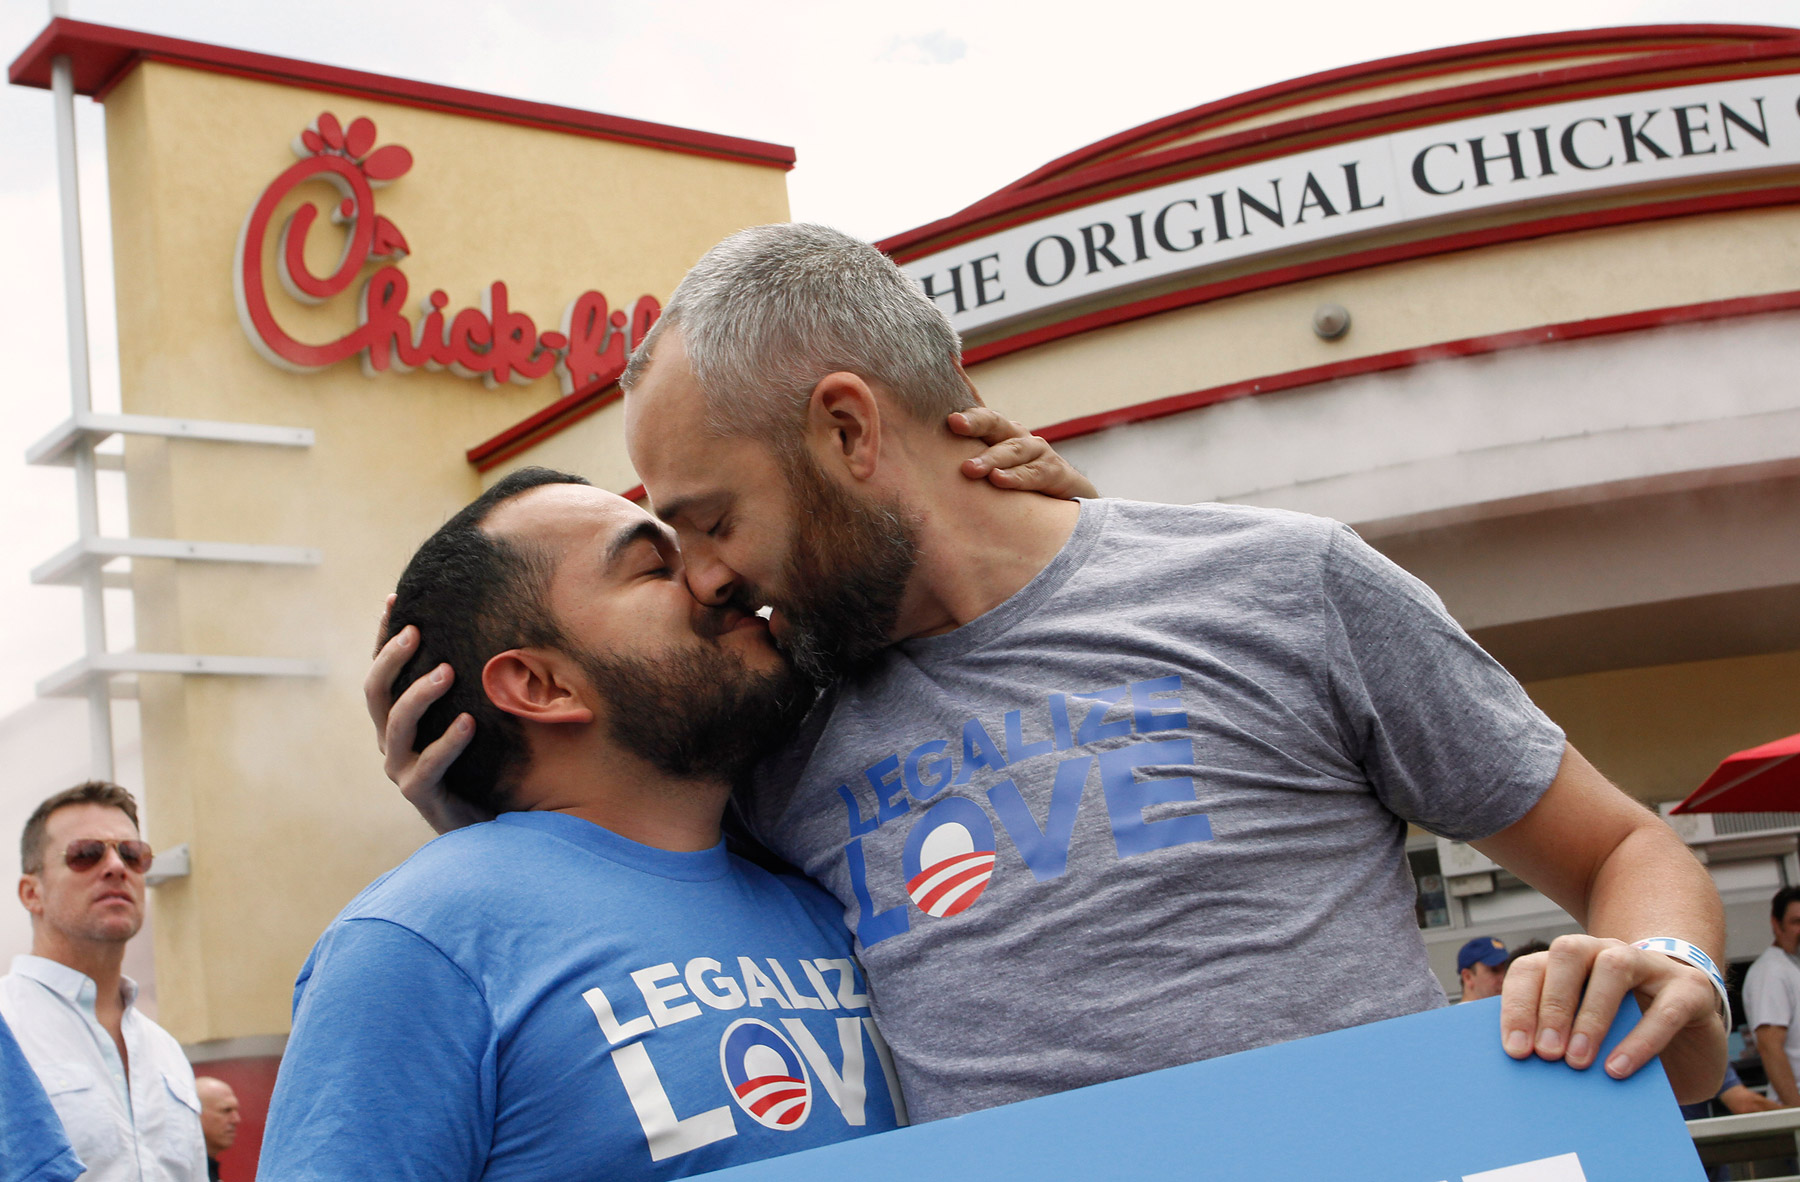 Cisneros and Montgomery kiss on national "kiss-in" day at Chick-fil-A restaurant in Hollywood